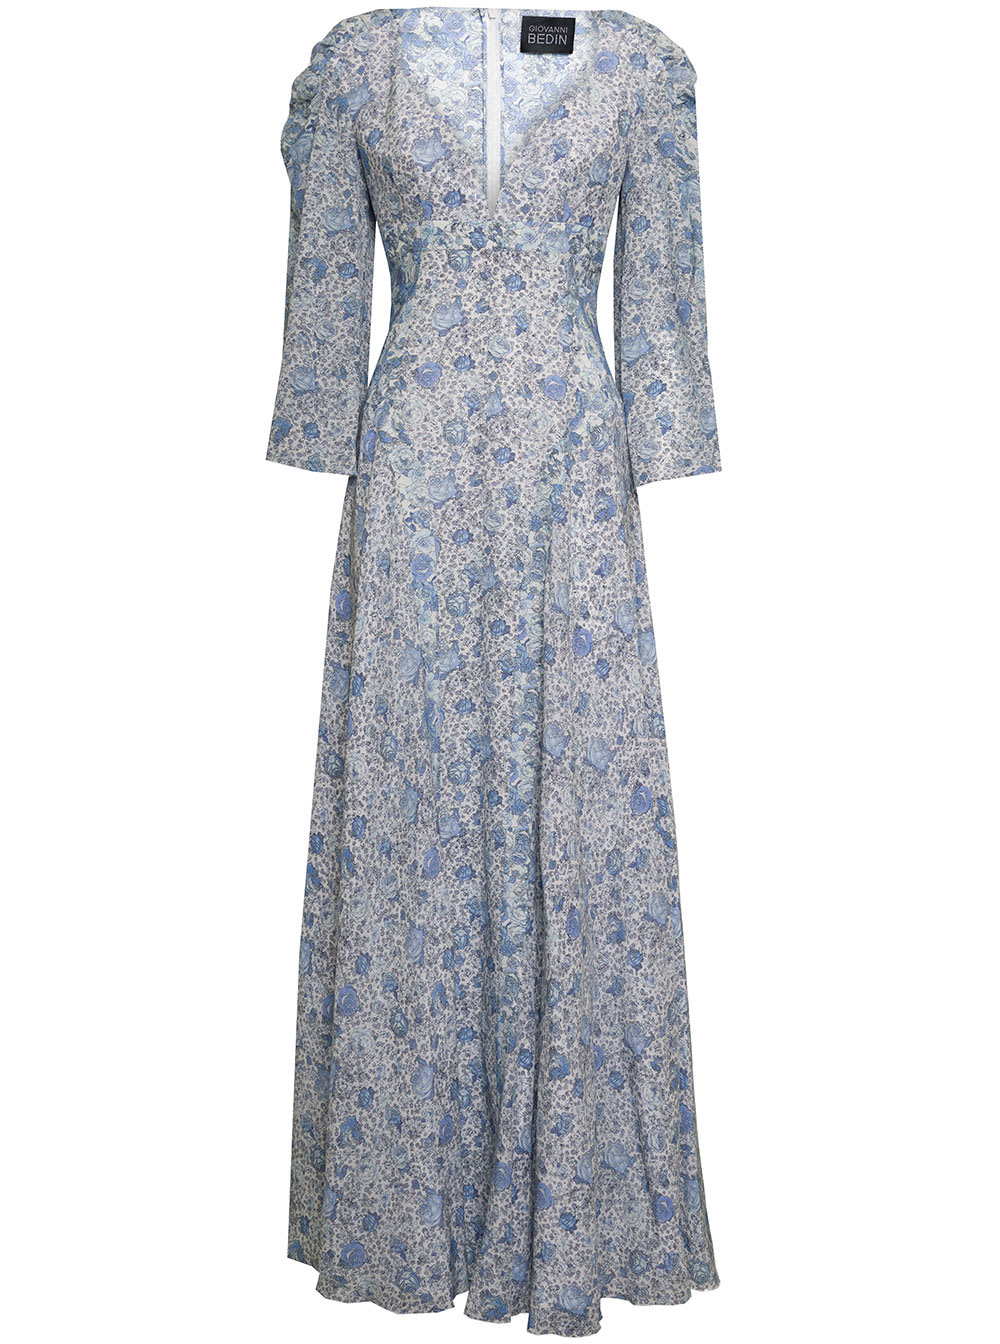 Giovanni Bedin Womans White And Light Blue Floral Silk Long Dress